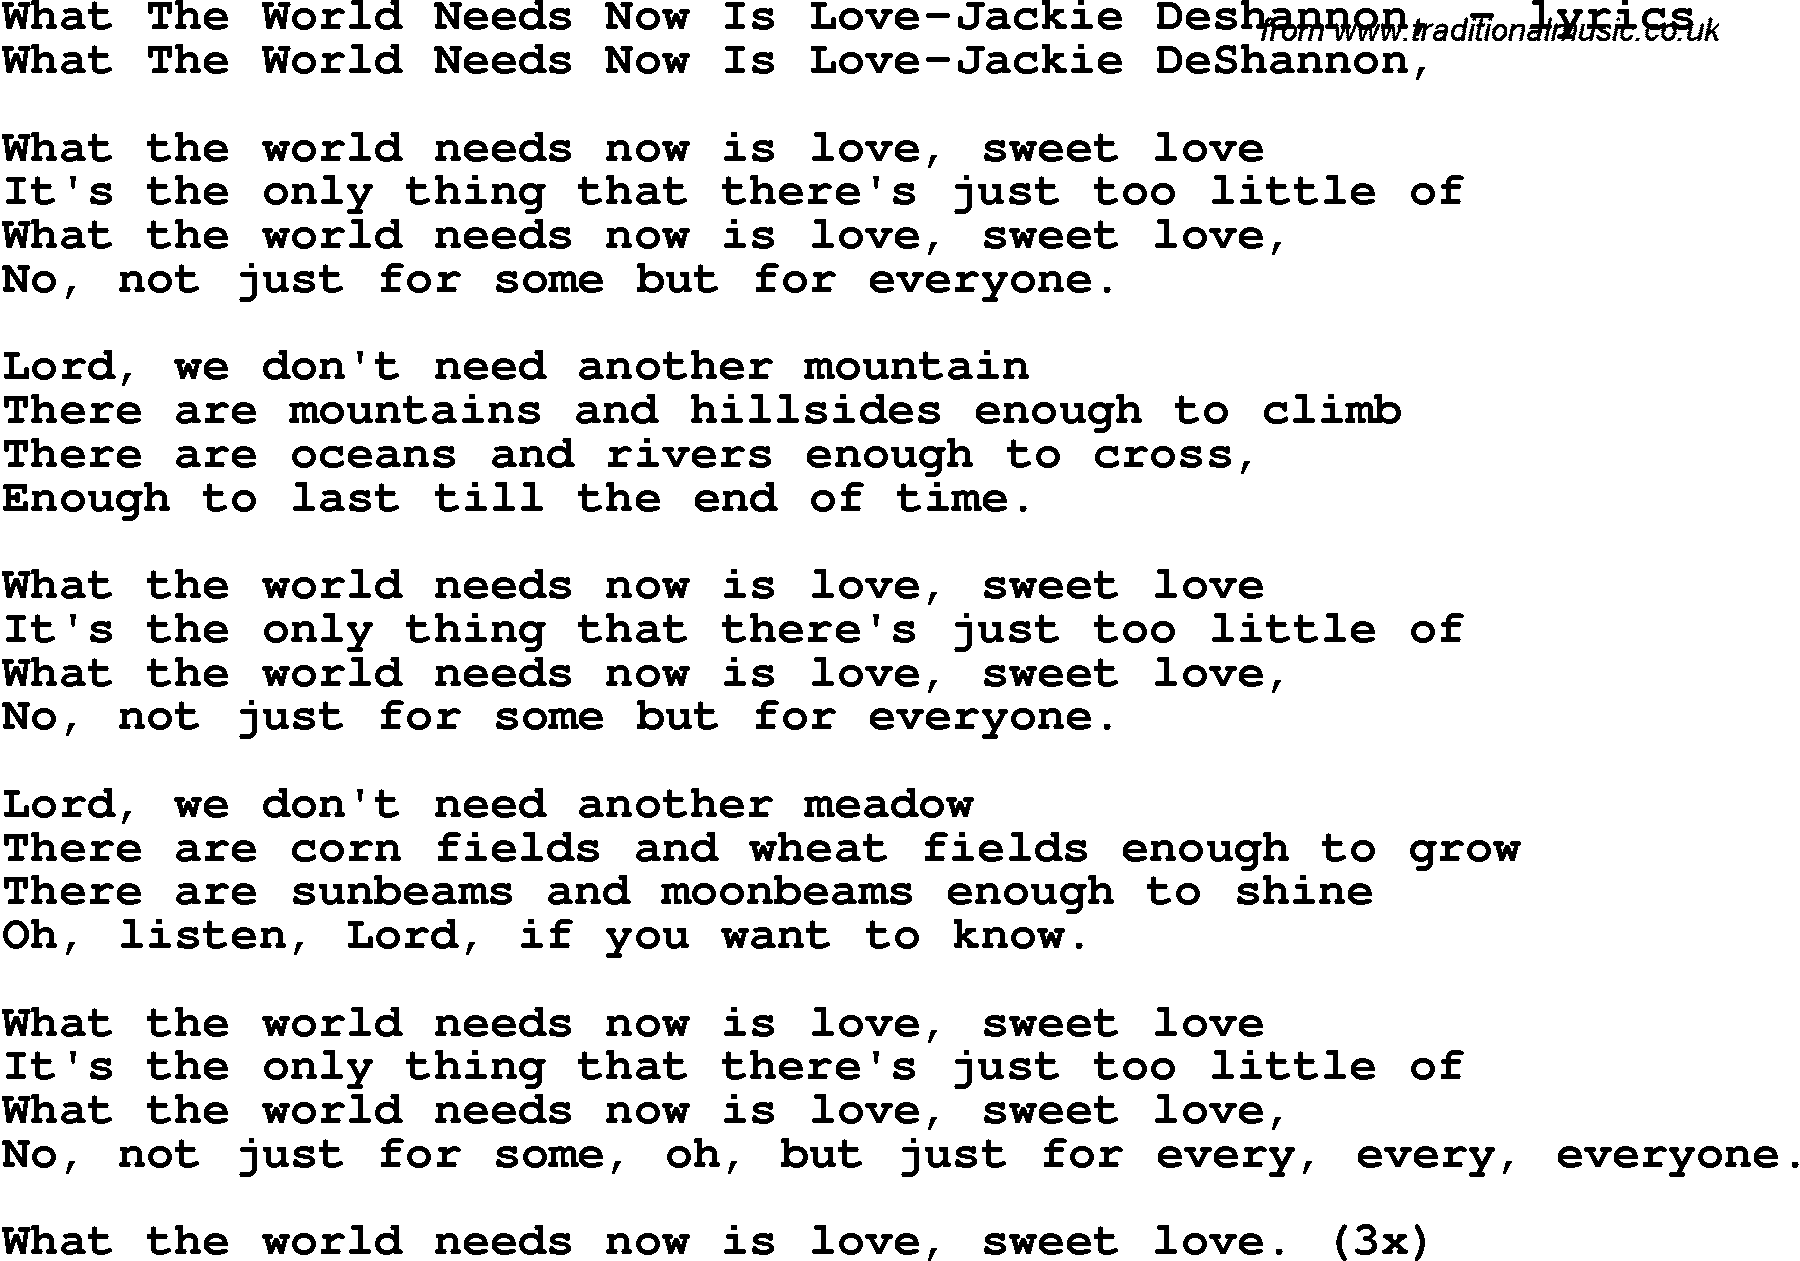 N love текст. What is Love текст. What is Love песня. Слова песни what is Love. Jackie DESHANNON - what the World needs Now is Love.